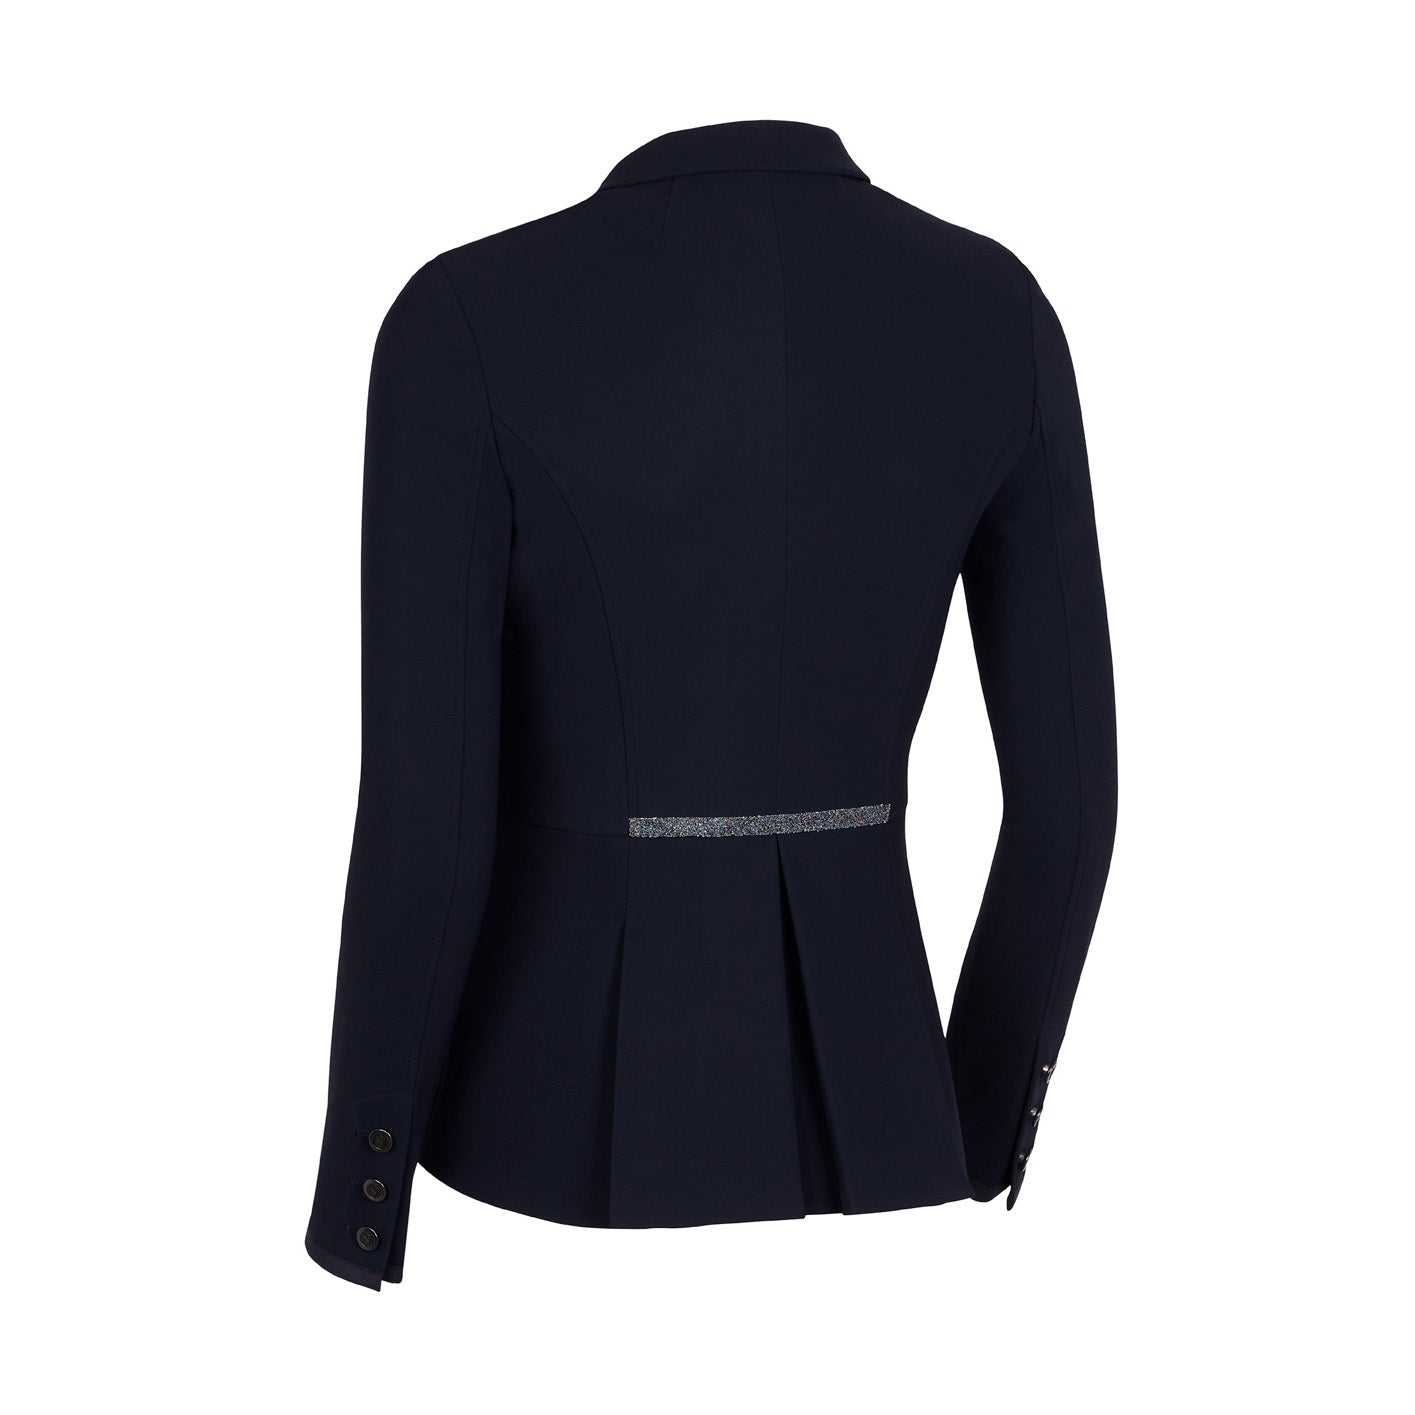 The Victorine Crystal Competition Jacket from Samshield.  This jacket offers a tailored fit giving an elegant silhouette. Made with a technical, breathable material with UV protection to take you through the seasons.  Finished with Swarovski Crystals on the sleeves and Crystal Fabric on the collar and back.  Available in Navy &amp; Black